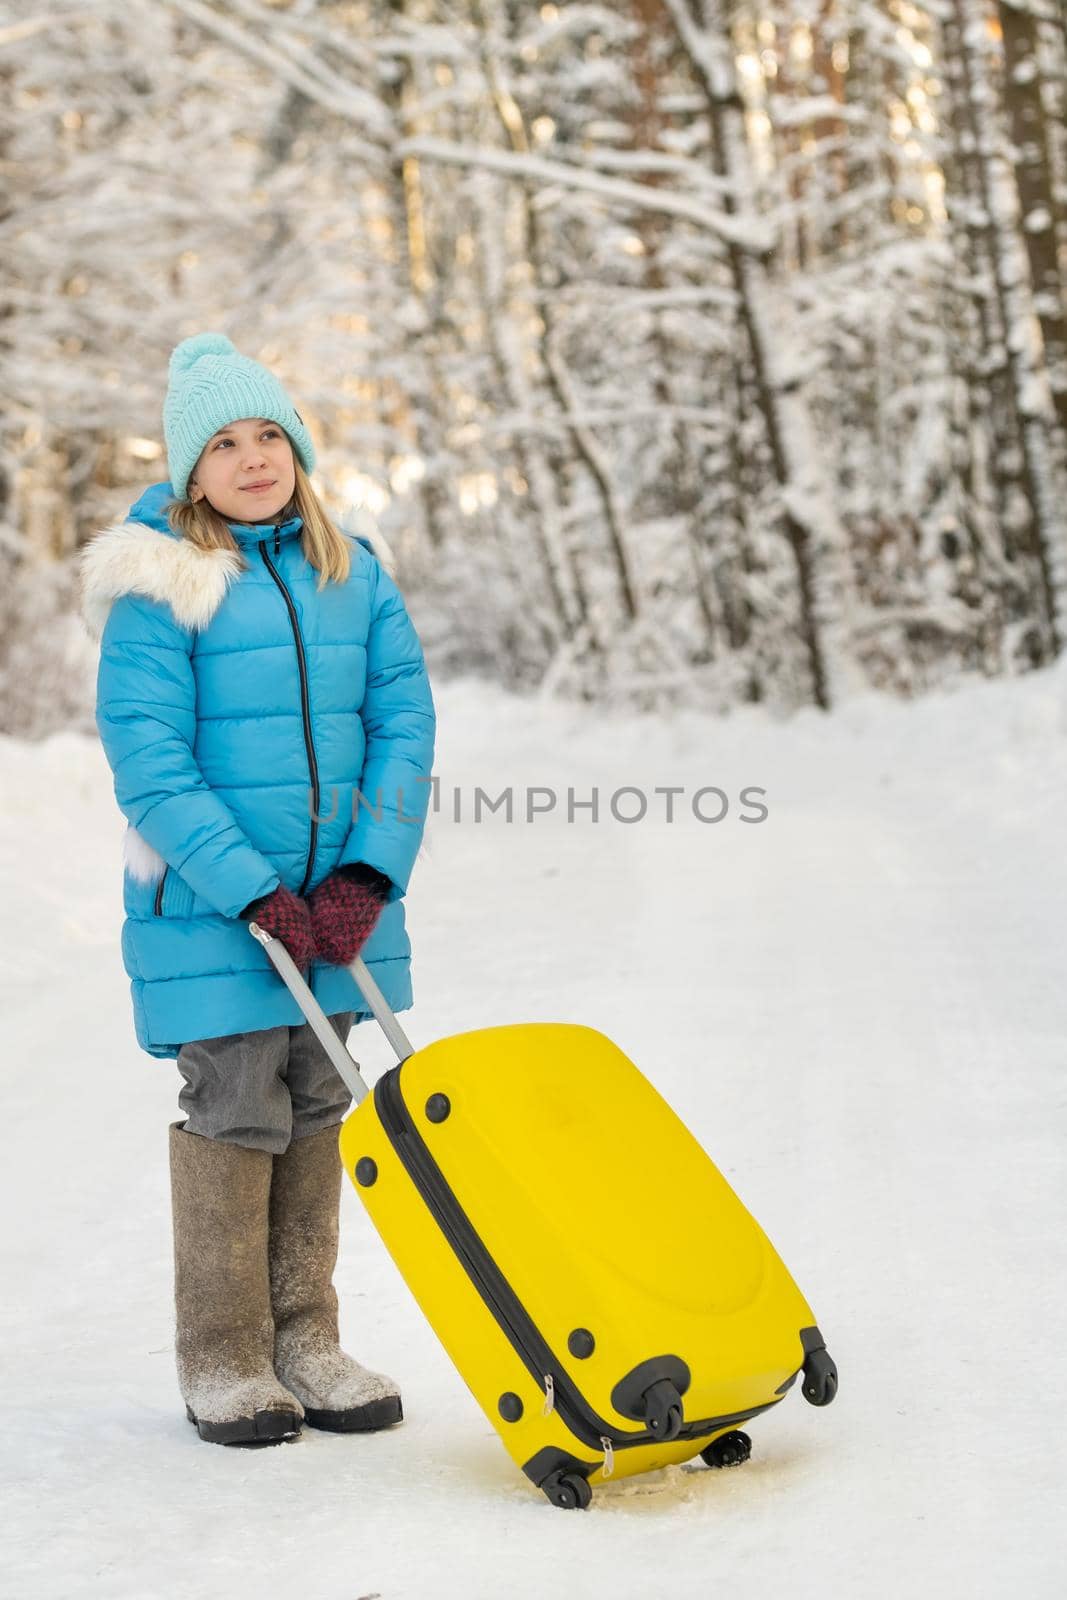 A girl in winter in felt boots goes with a suitcase on a frosty snowy day.